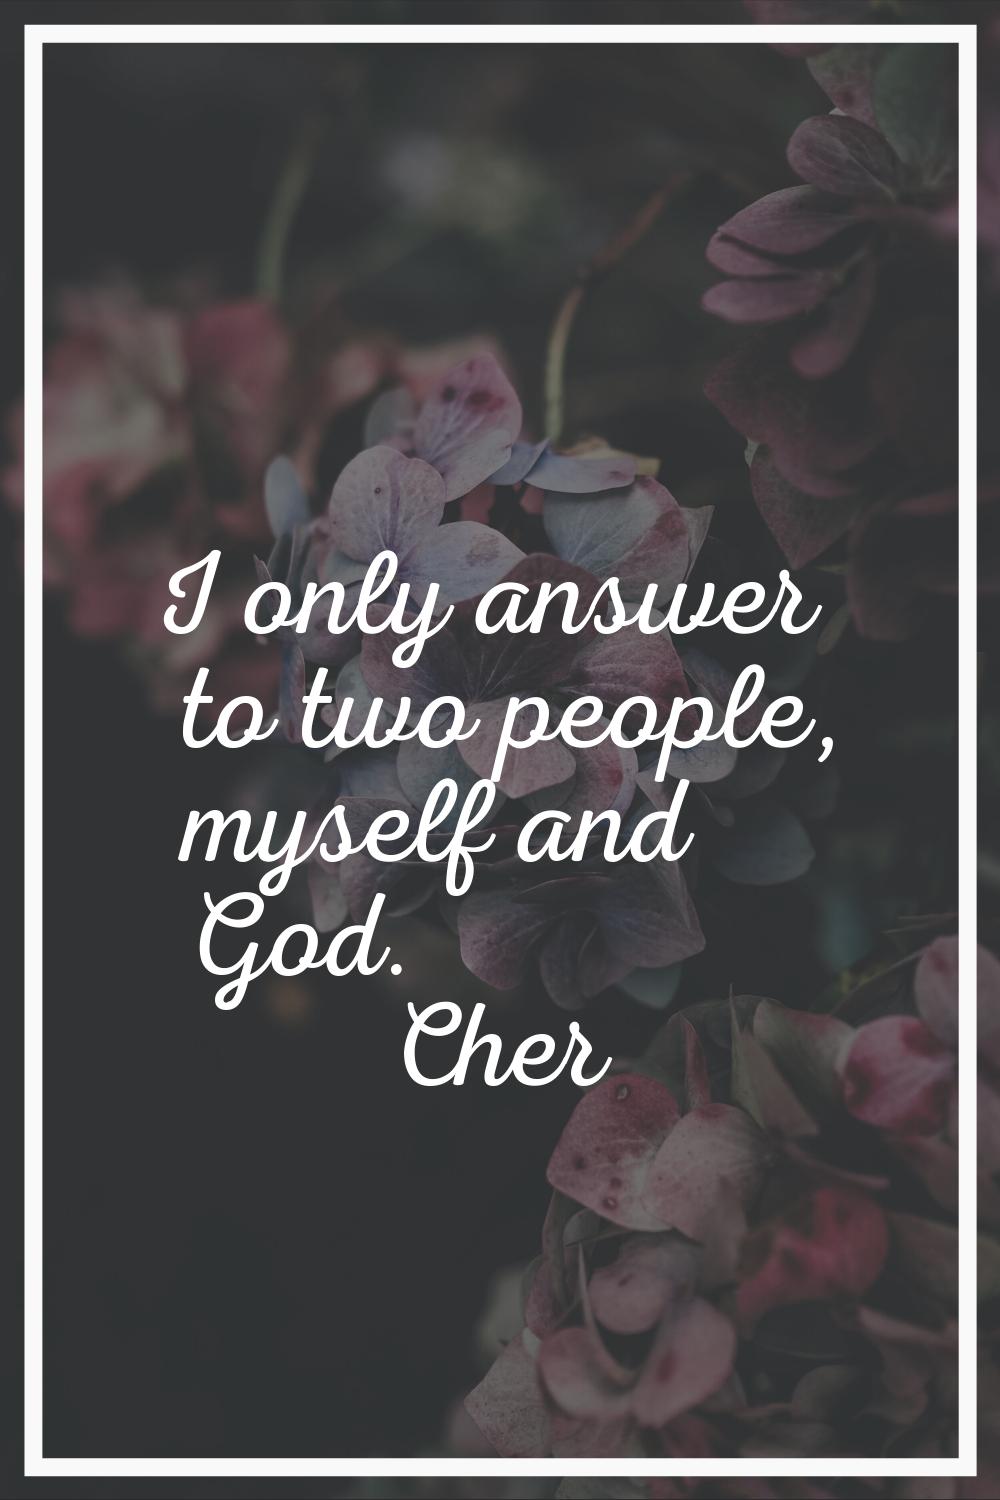 I only answer to two people, myself and God.